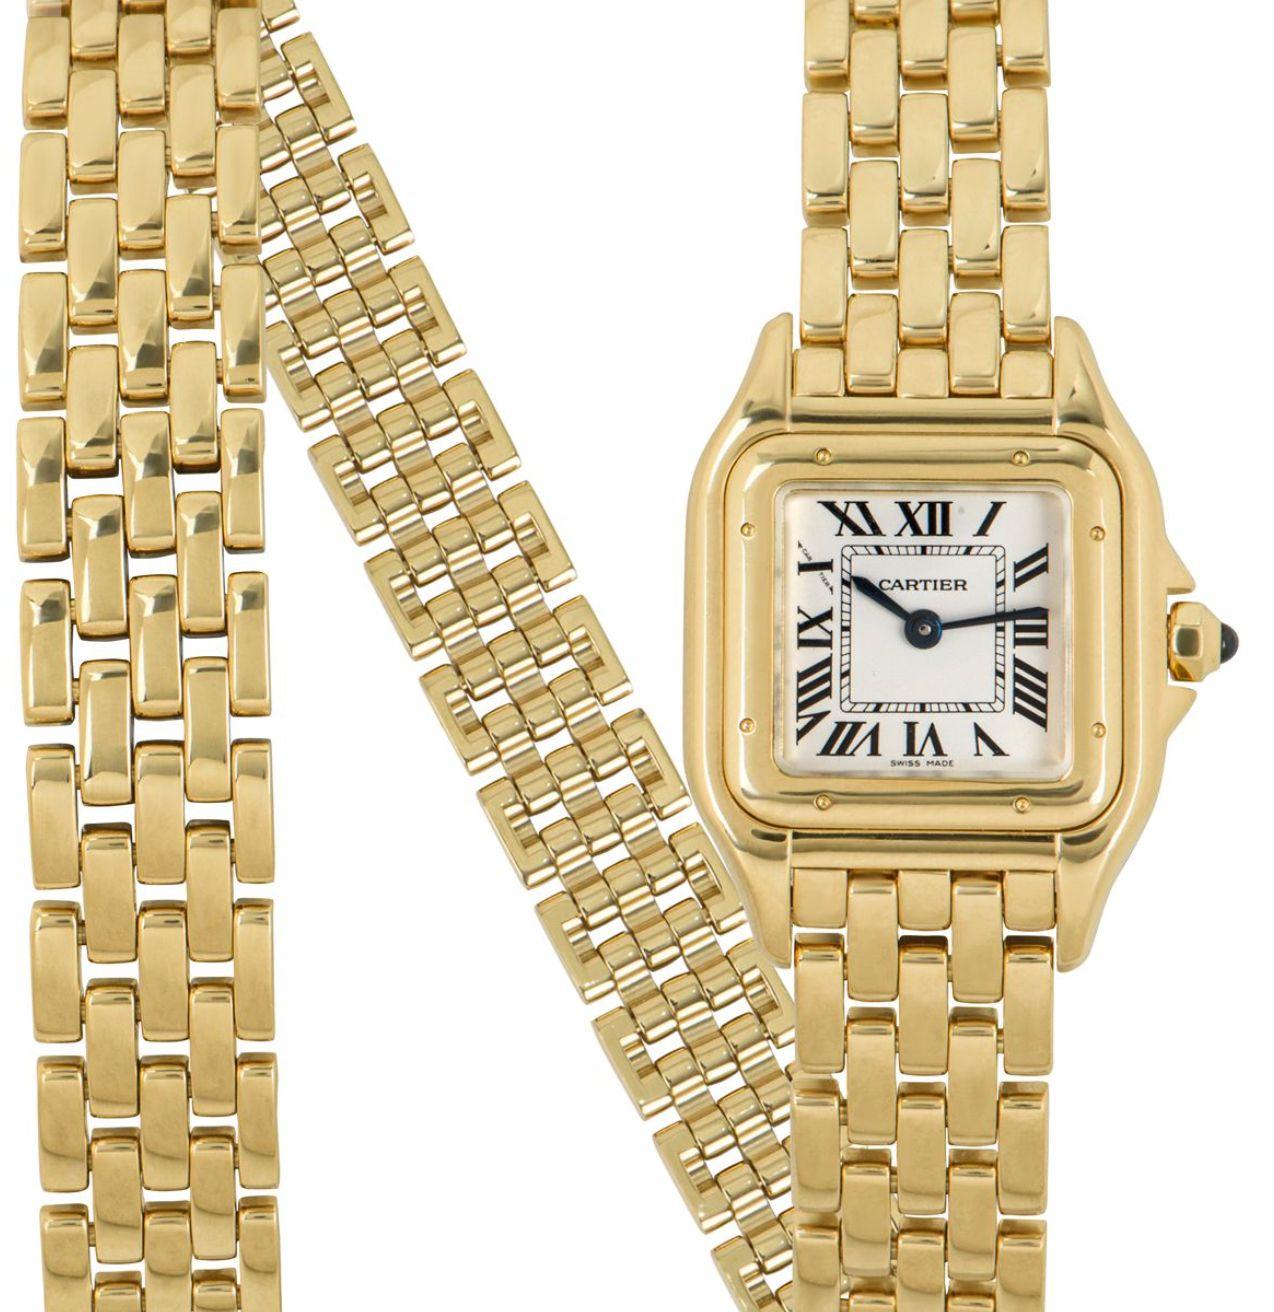 A stunning Cartier ladies wristwatch in yellow gold. Featuring a silver dial with roman numerals, blued steel sword shaped hands, Cartier's own hidden signature at 'X' and a crown set with a single cabochon.

Fitted with a scratch resistant sapphire